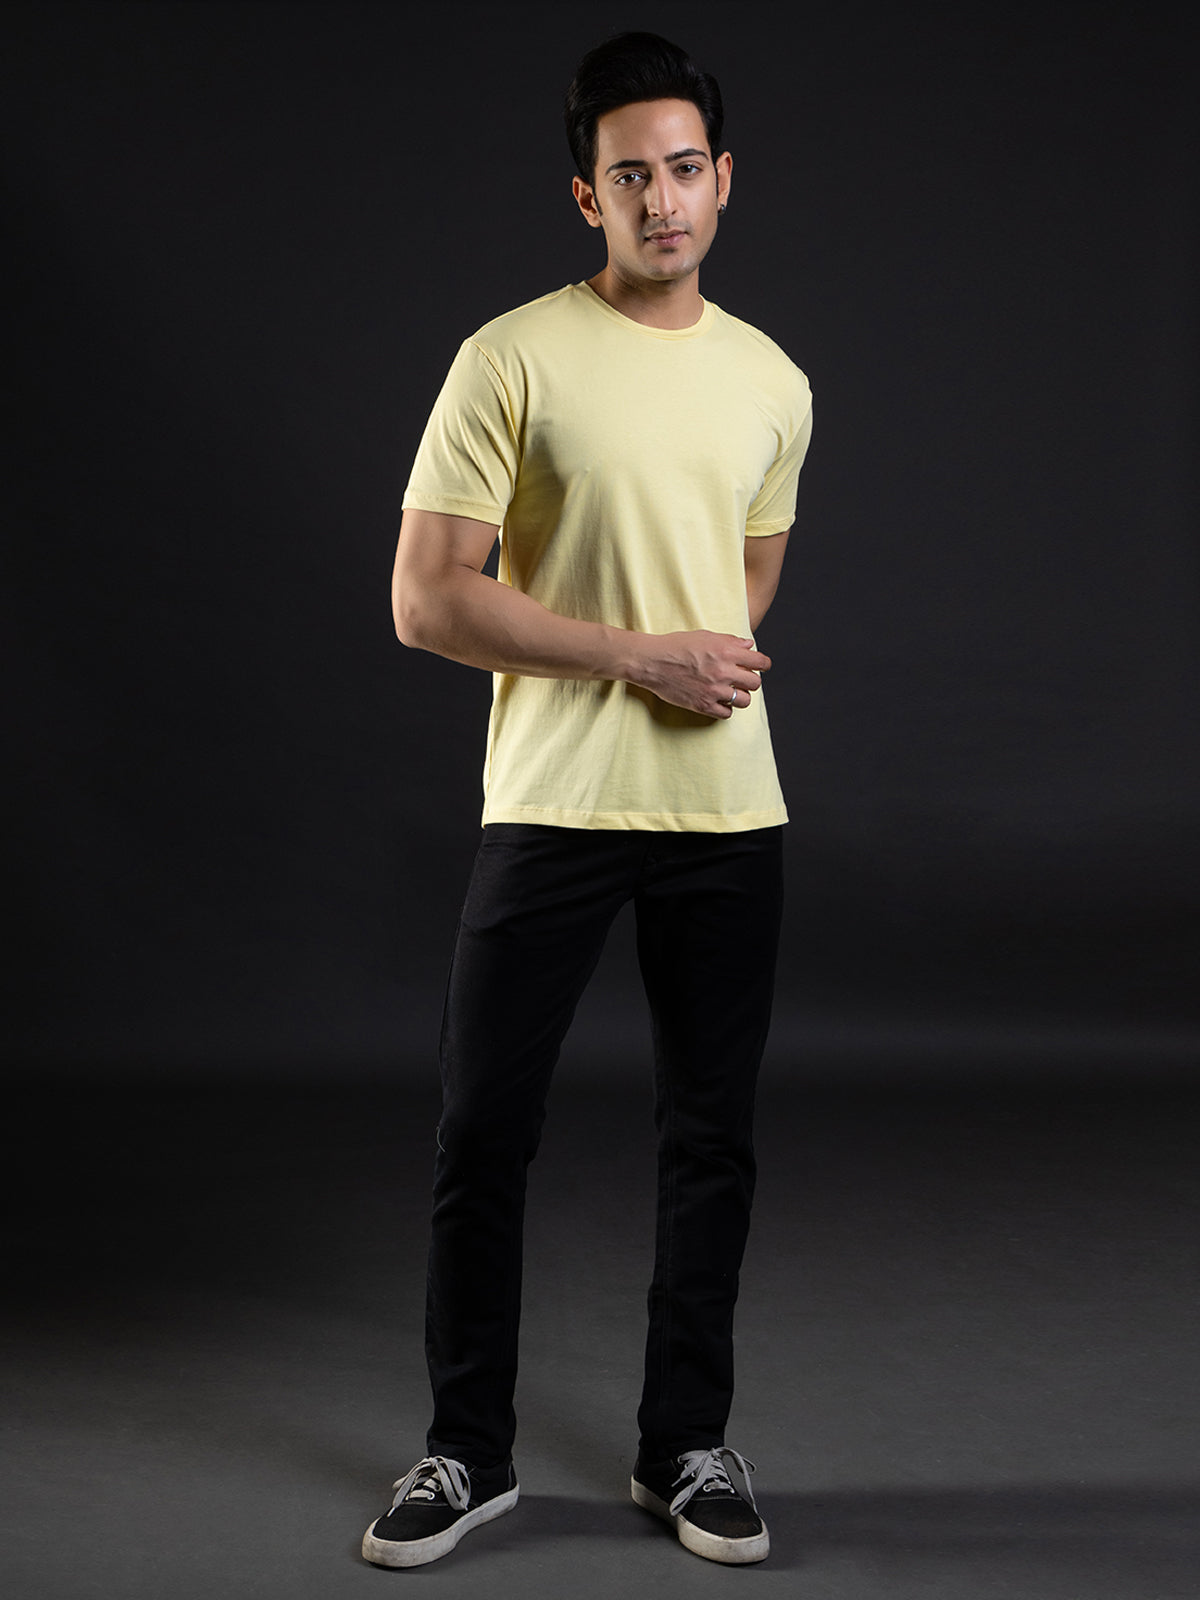 Pastel Yellow  | ACTION series | Sports t shirt for Men